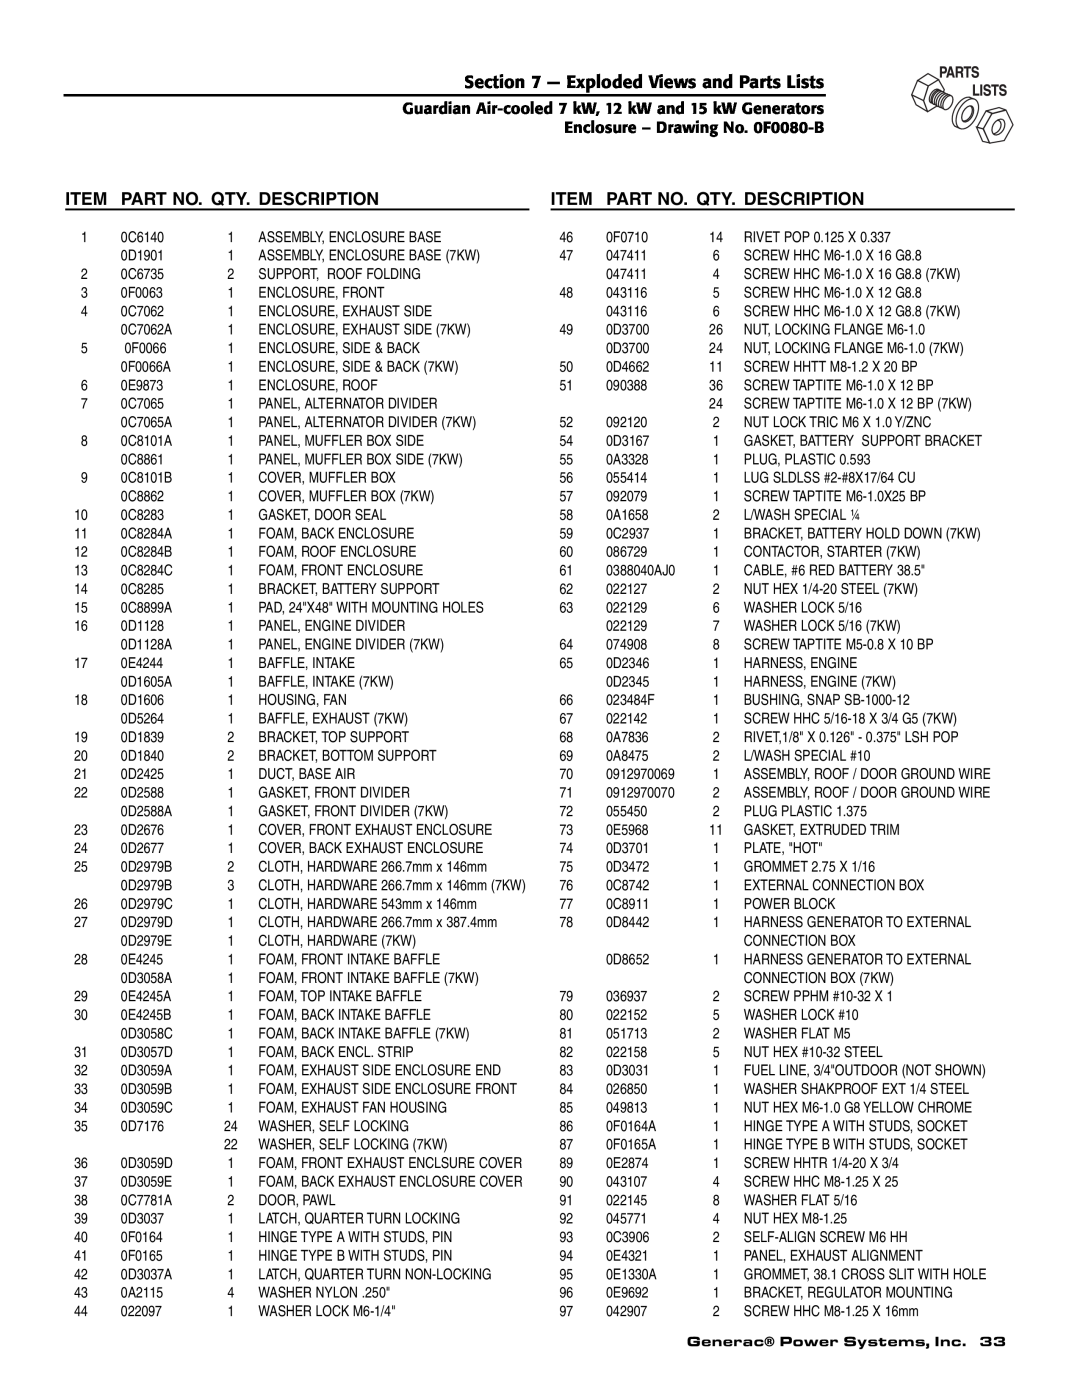 Generac Power Systems 04758-2, 04759-2, 04760-2 owner manual Exploded Views and Parts Lists, Part No. Qty. Description 